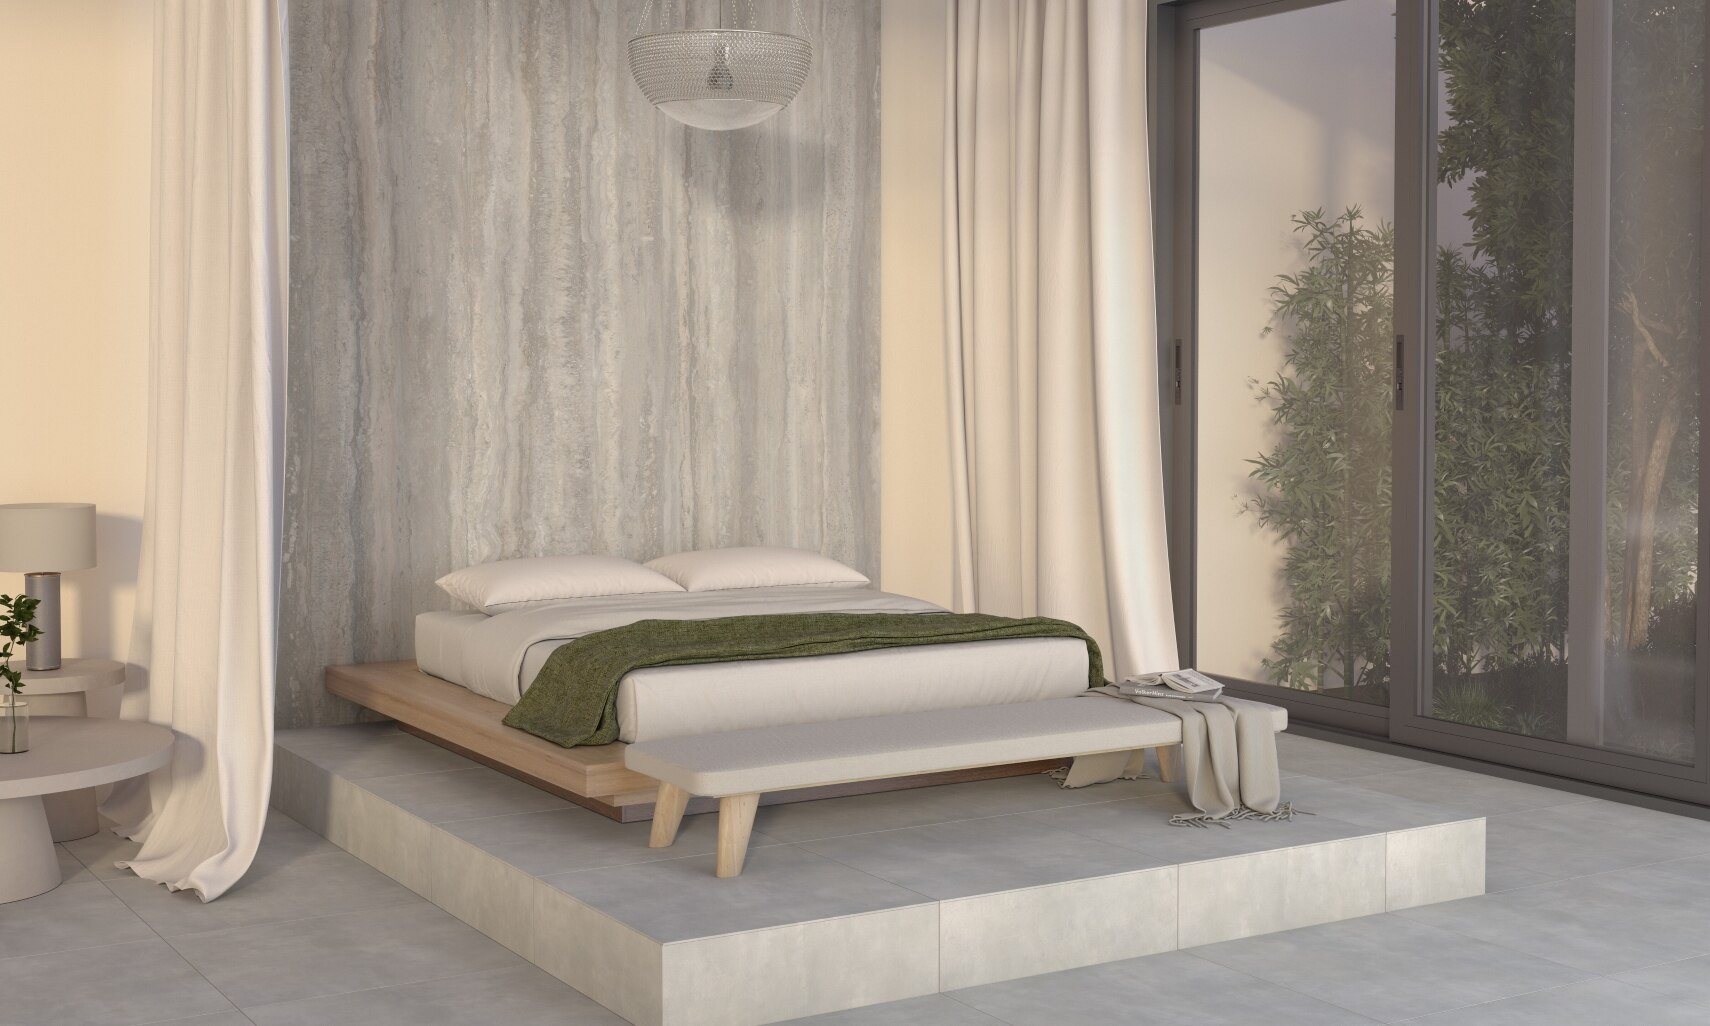 Bedroom with white canopy over a king-sized bed on gray stone look porcelain slab flooring and raised platform, and gray marble look porcelain slab headboard wall.